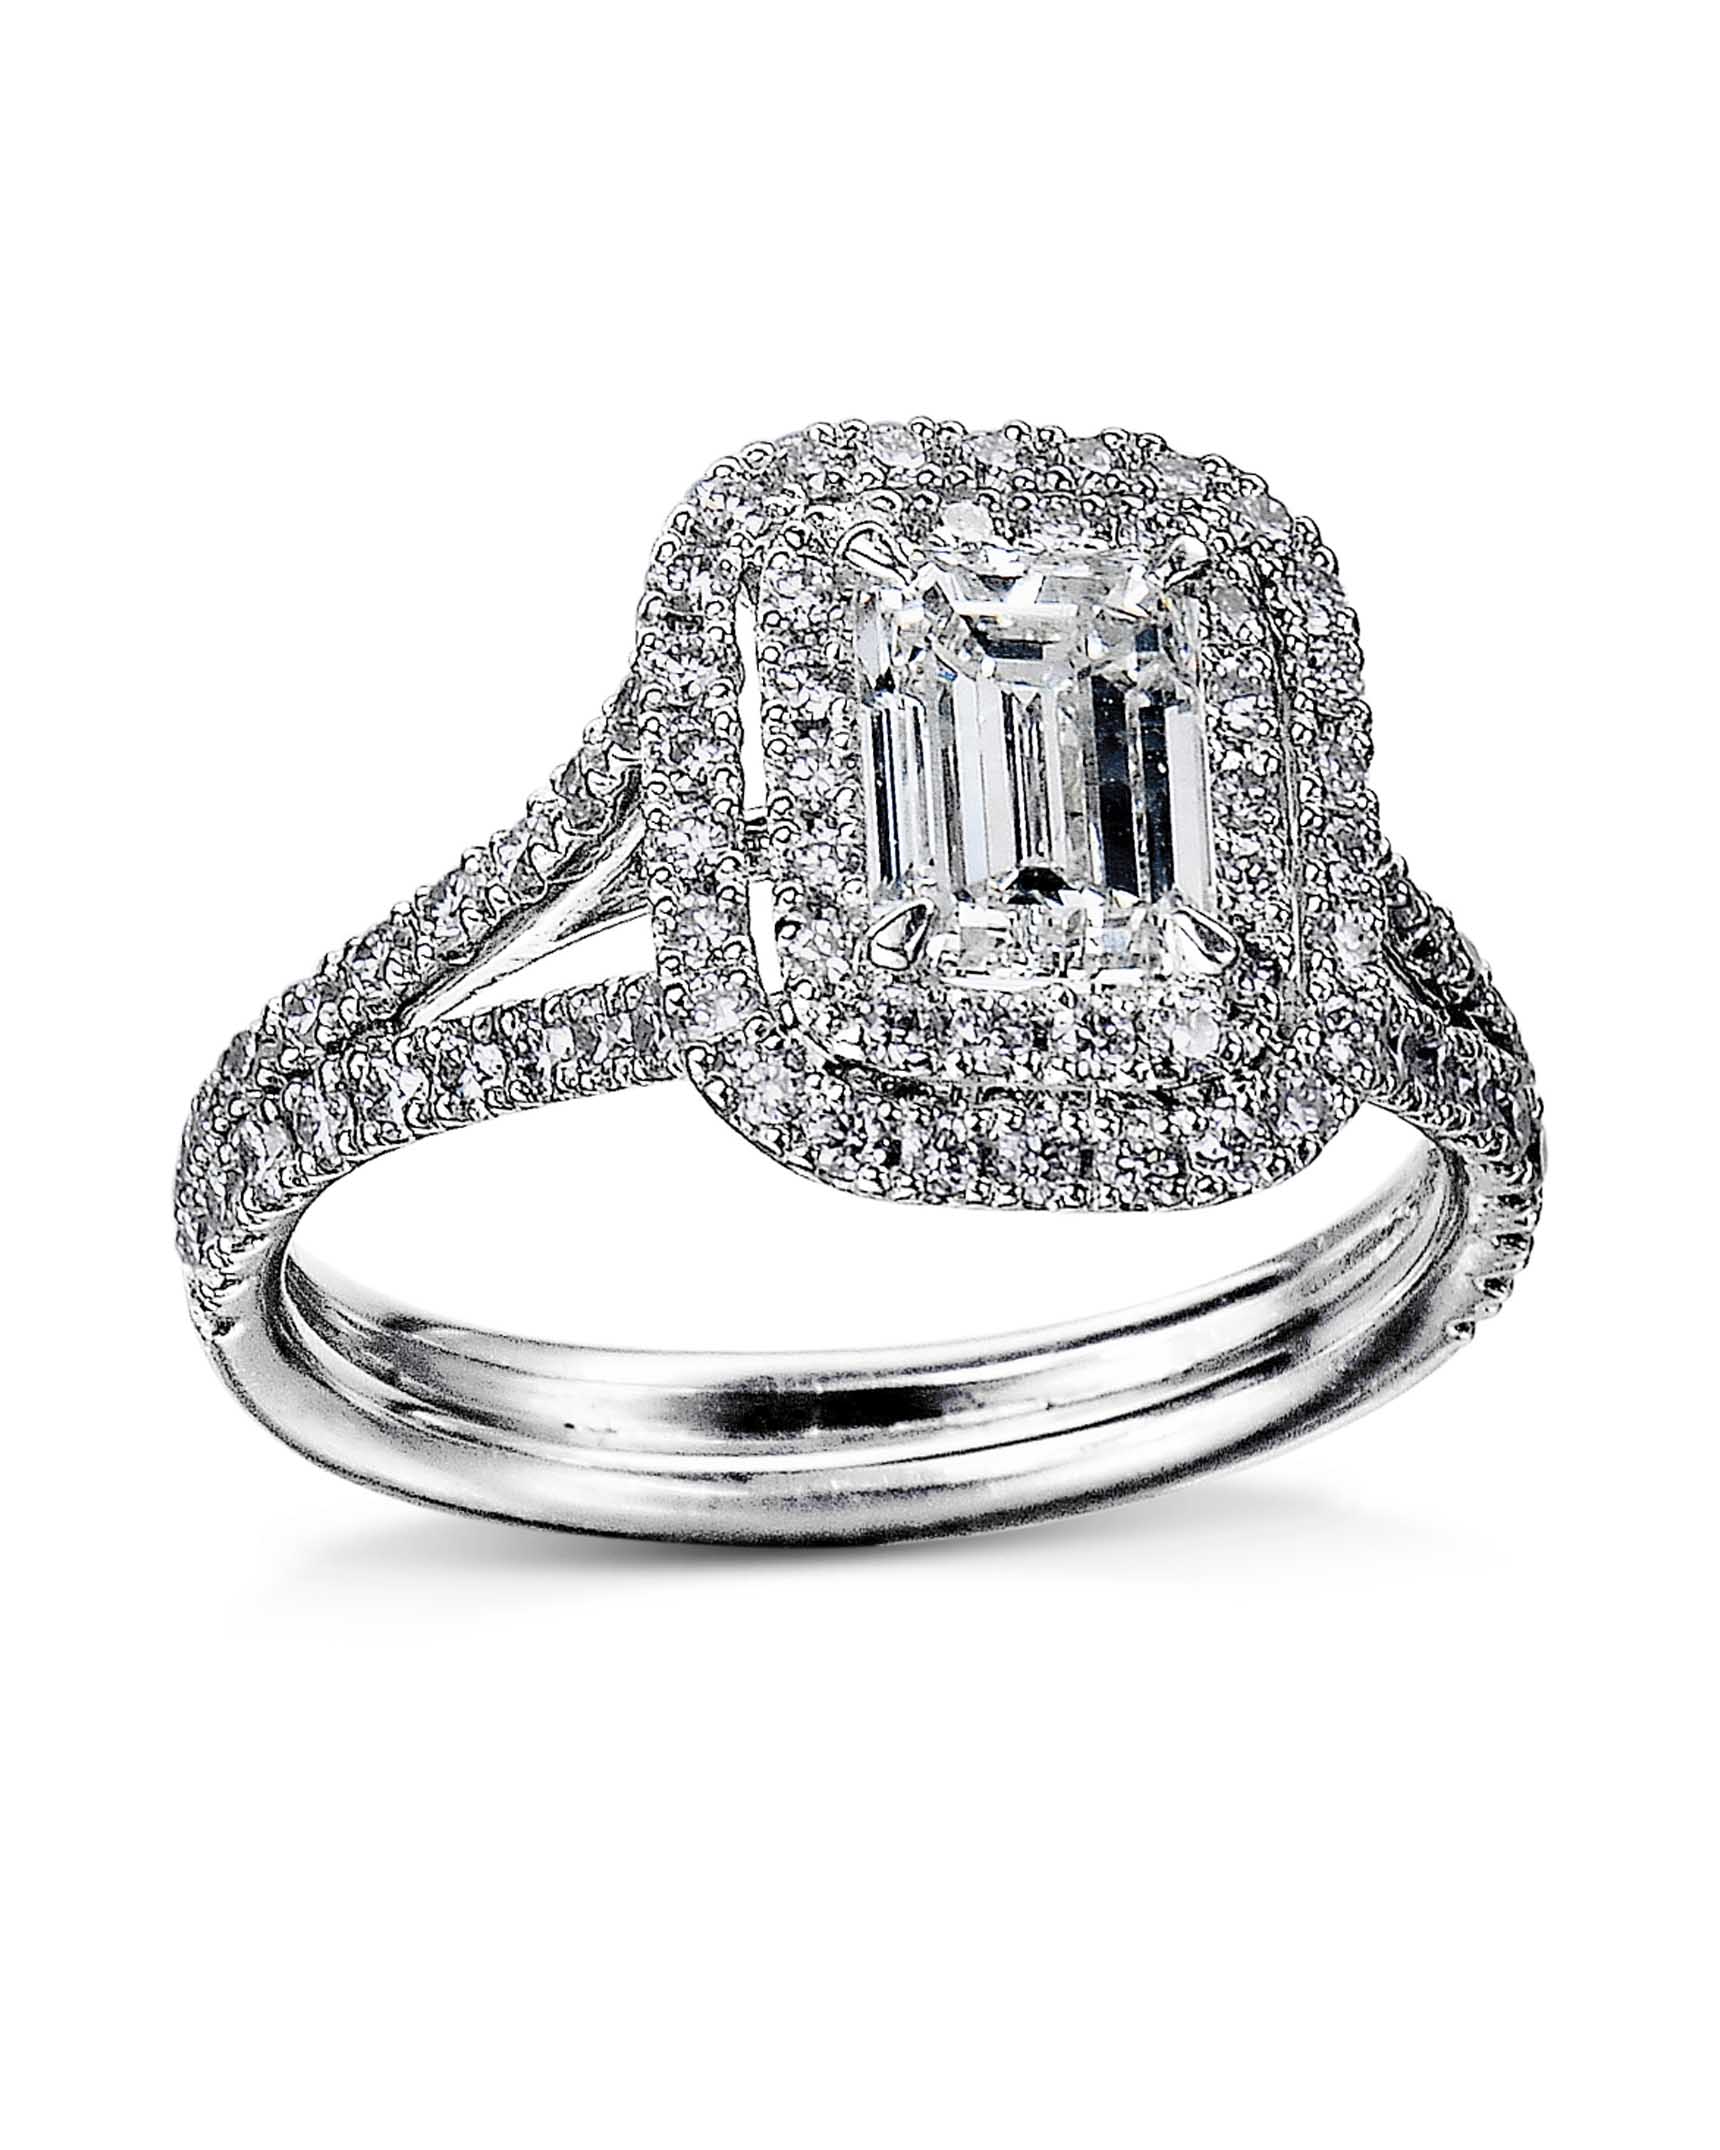 Emerald Cut Double Halo Engagement Ring - Claudia - Sylvie Jewelry